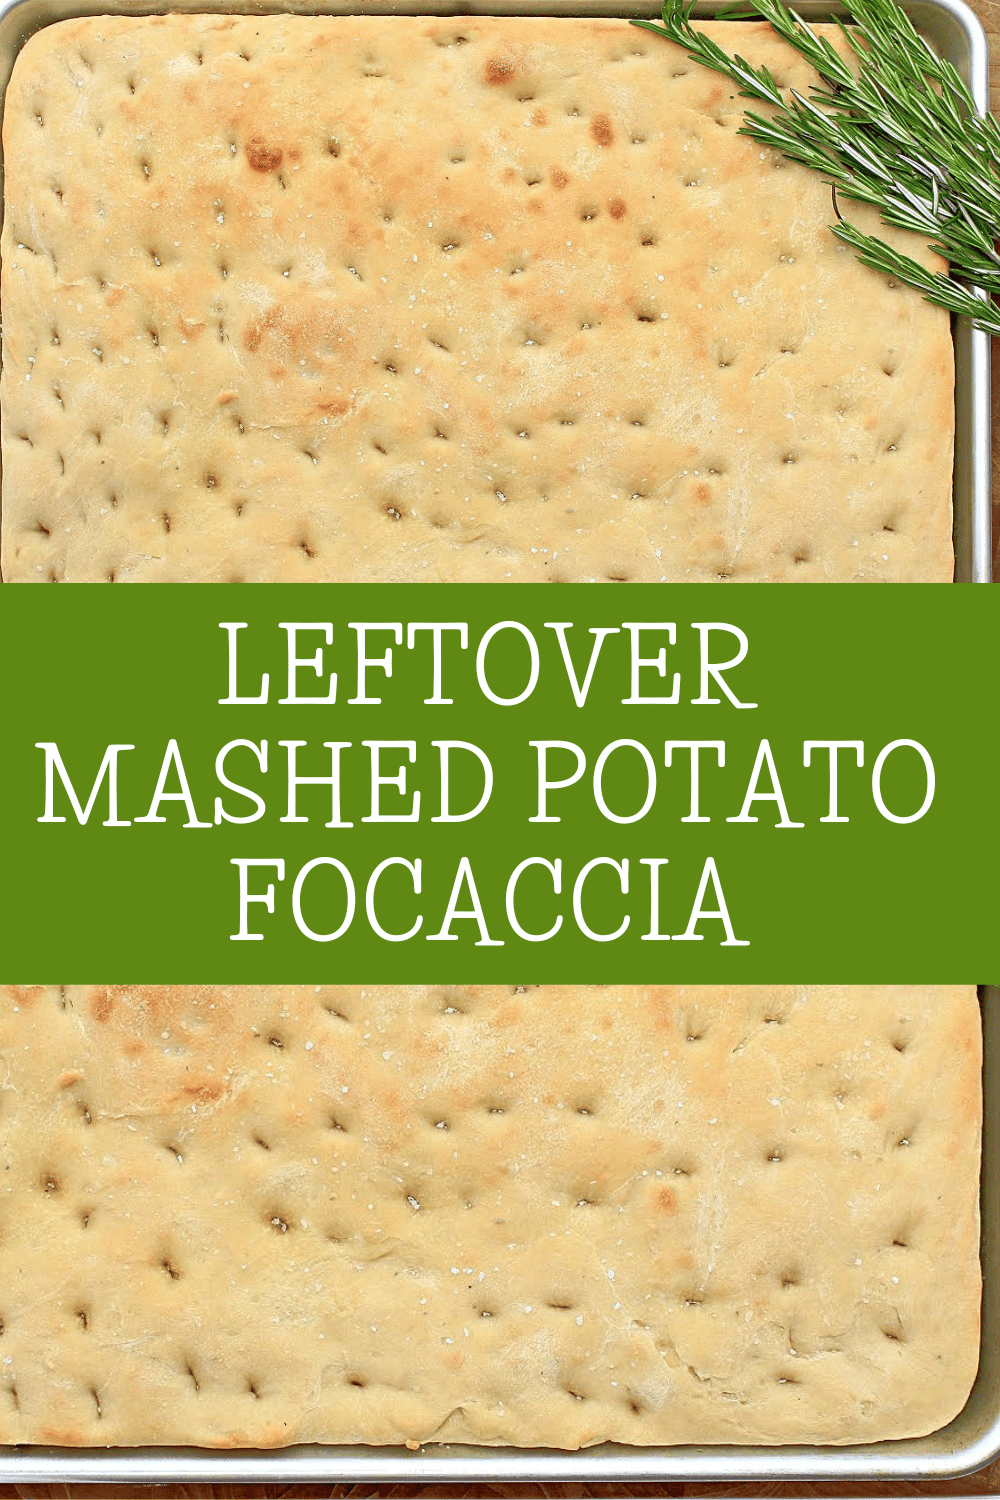 Leftover Mashed Potato Focaccia ~ A soft and chewy yeast bread perfect for turning those leftover potatoes into something new and delicious!  via @thiswifecooks